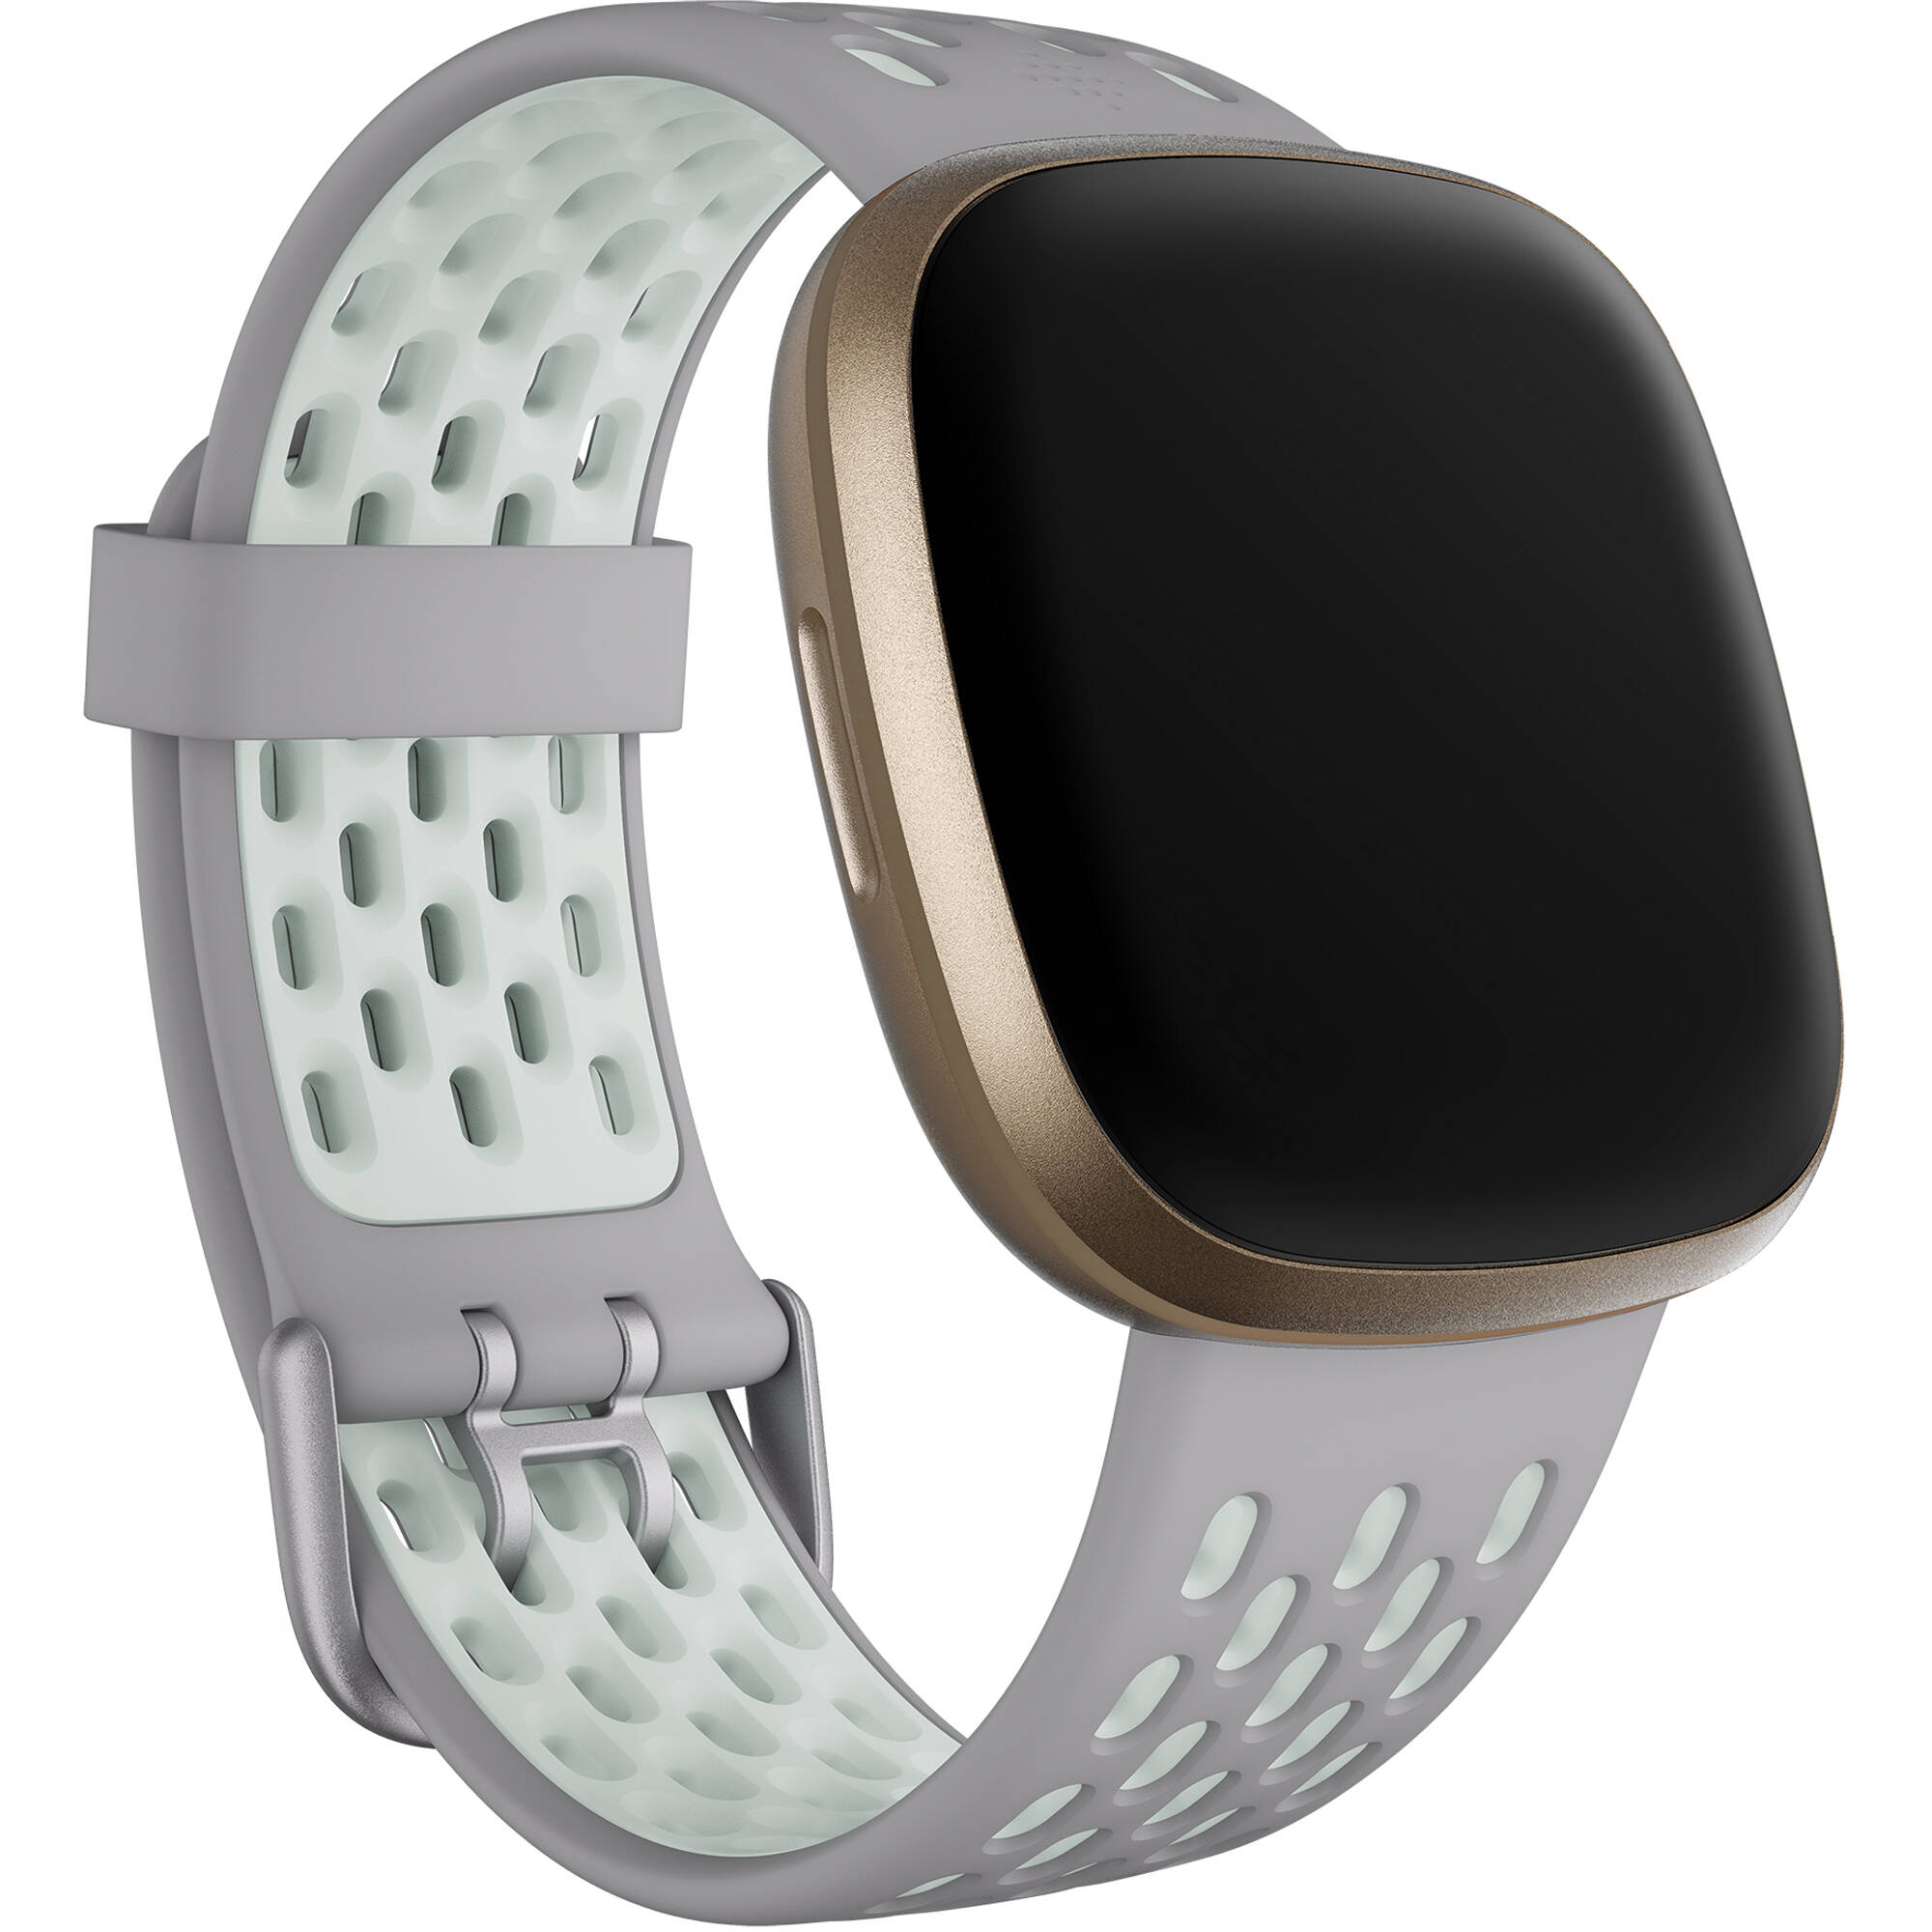 fitbit sport band stores